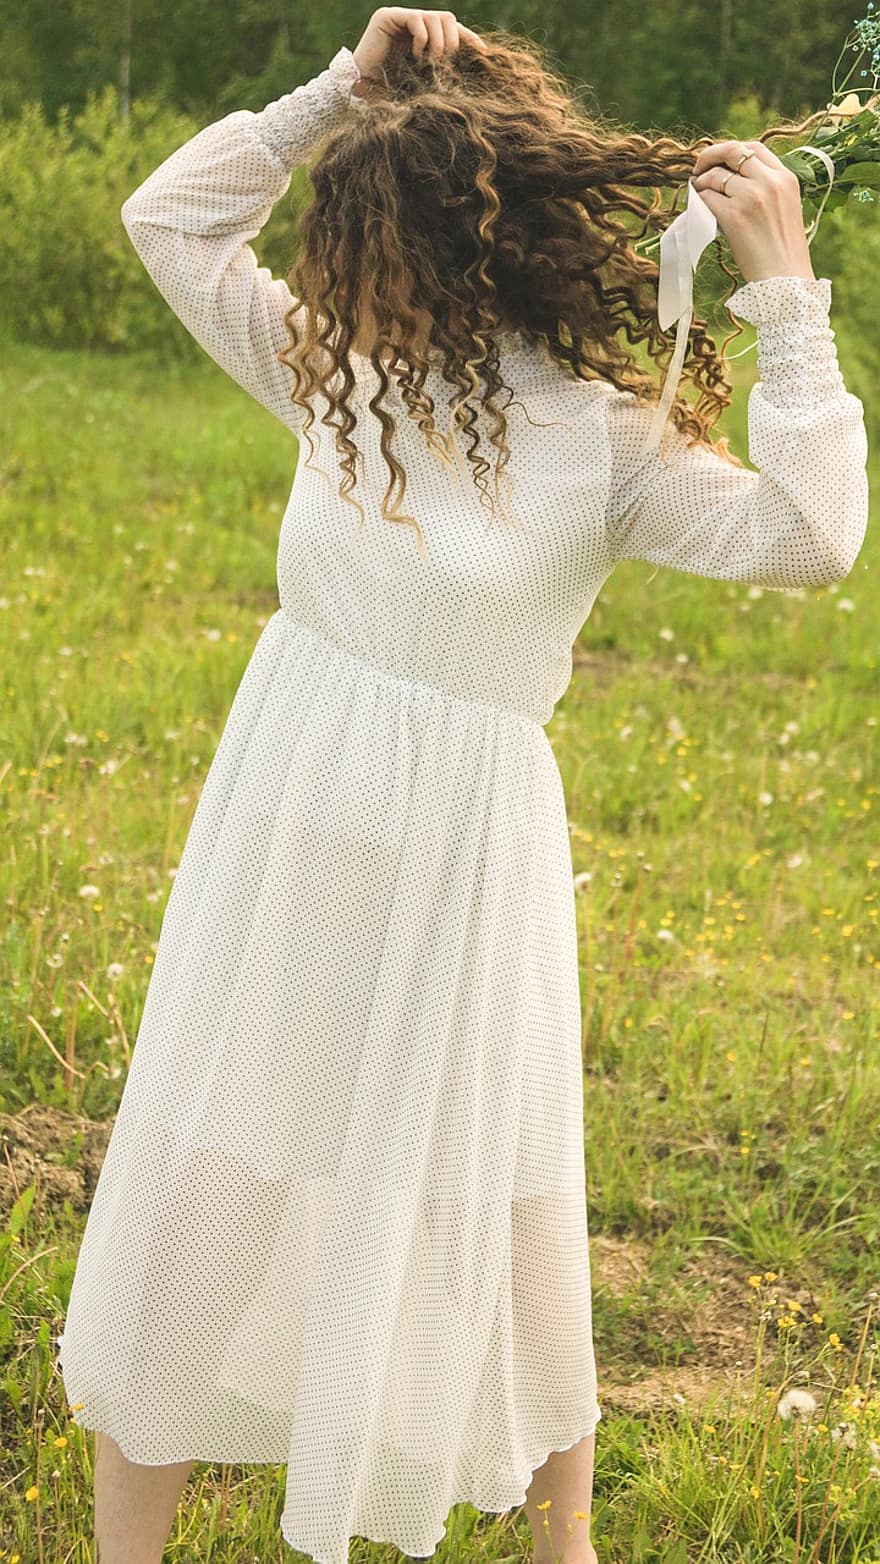 Girl, White Dress, Curly Hair, Brunette, Hairstyle, Dress, Fashion, Style, Young Woman, Female, Curls